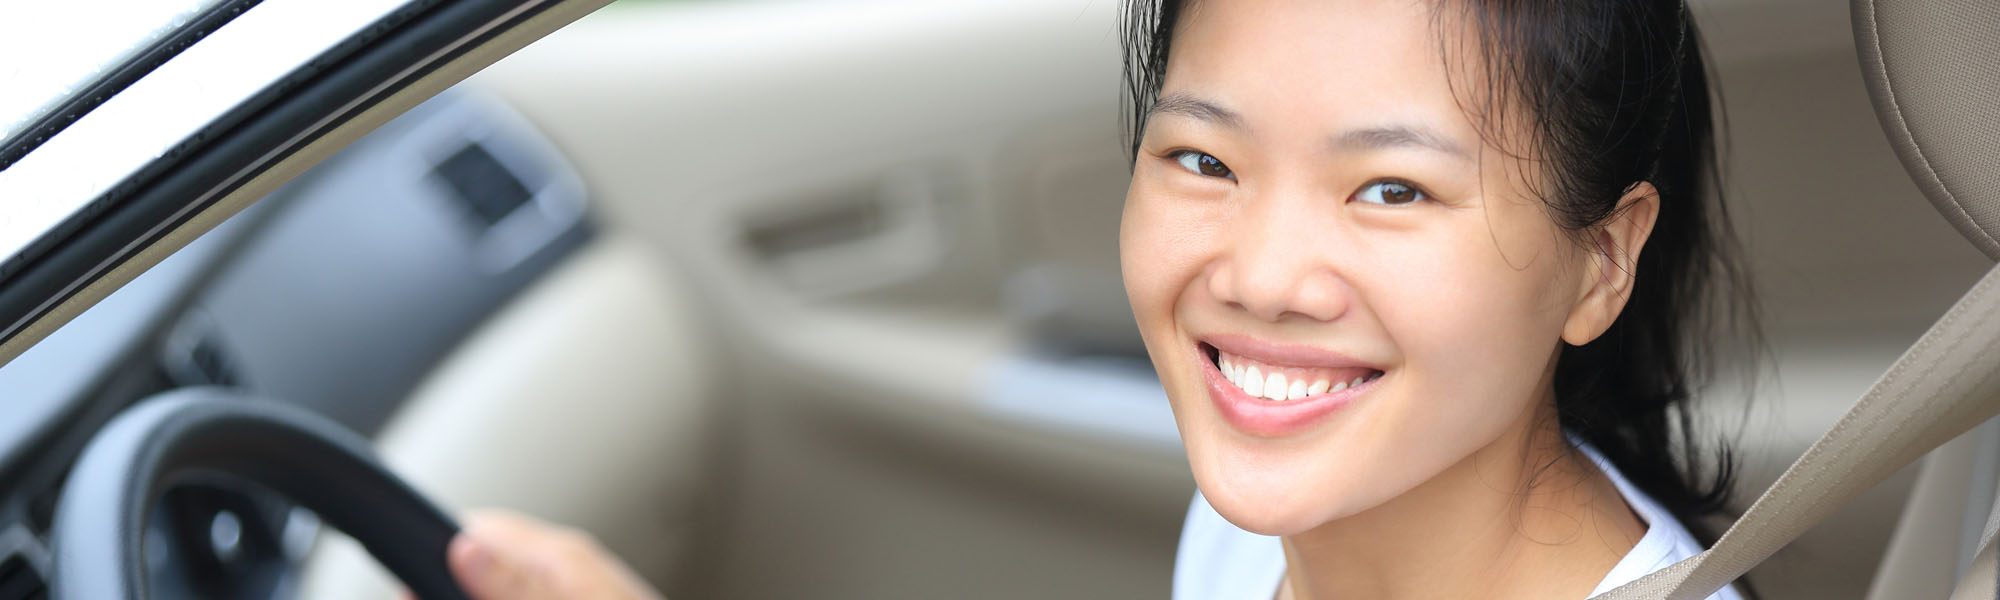 Happy Woman Smiling While Driving